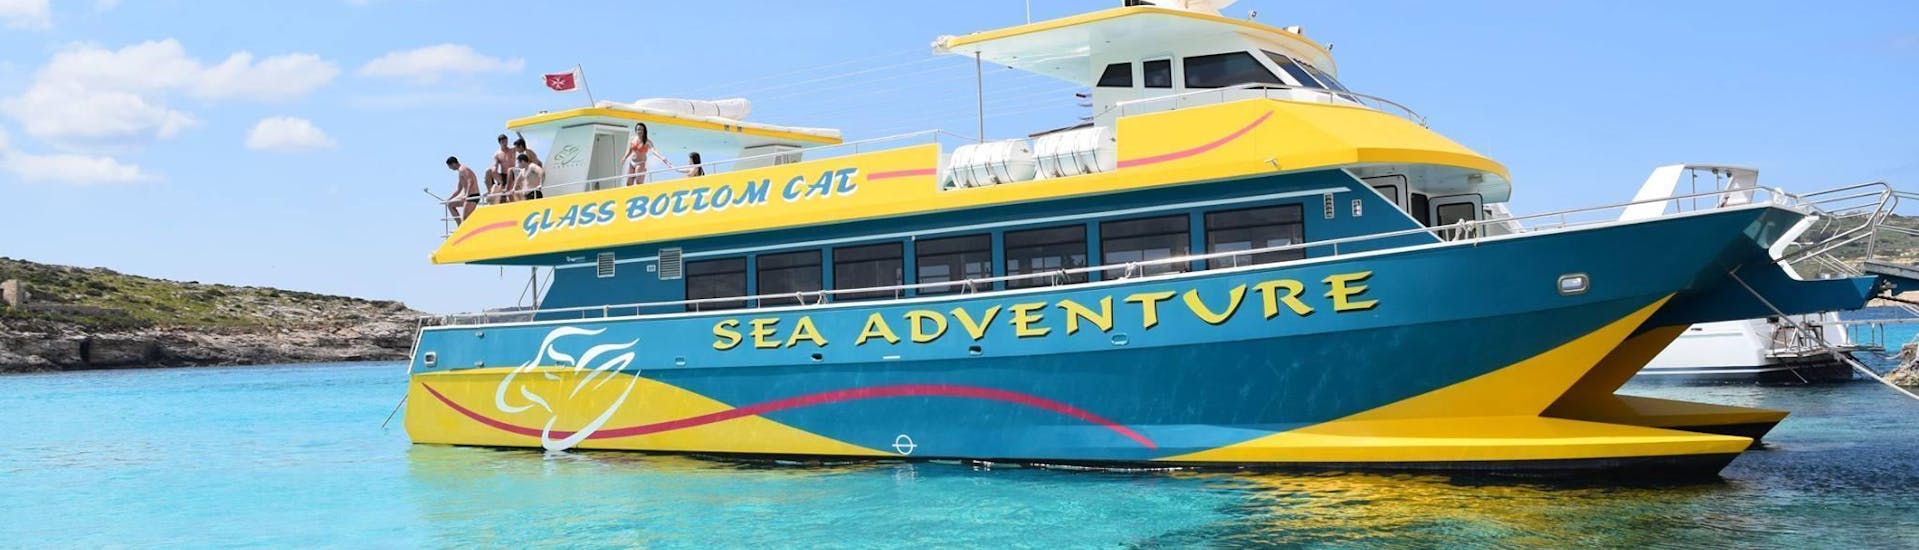 Holidaymakers are enjoying the view during their catamaran tour organised by Sea Adventure Excursions.